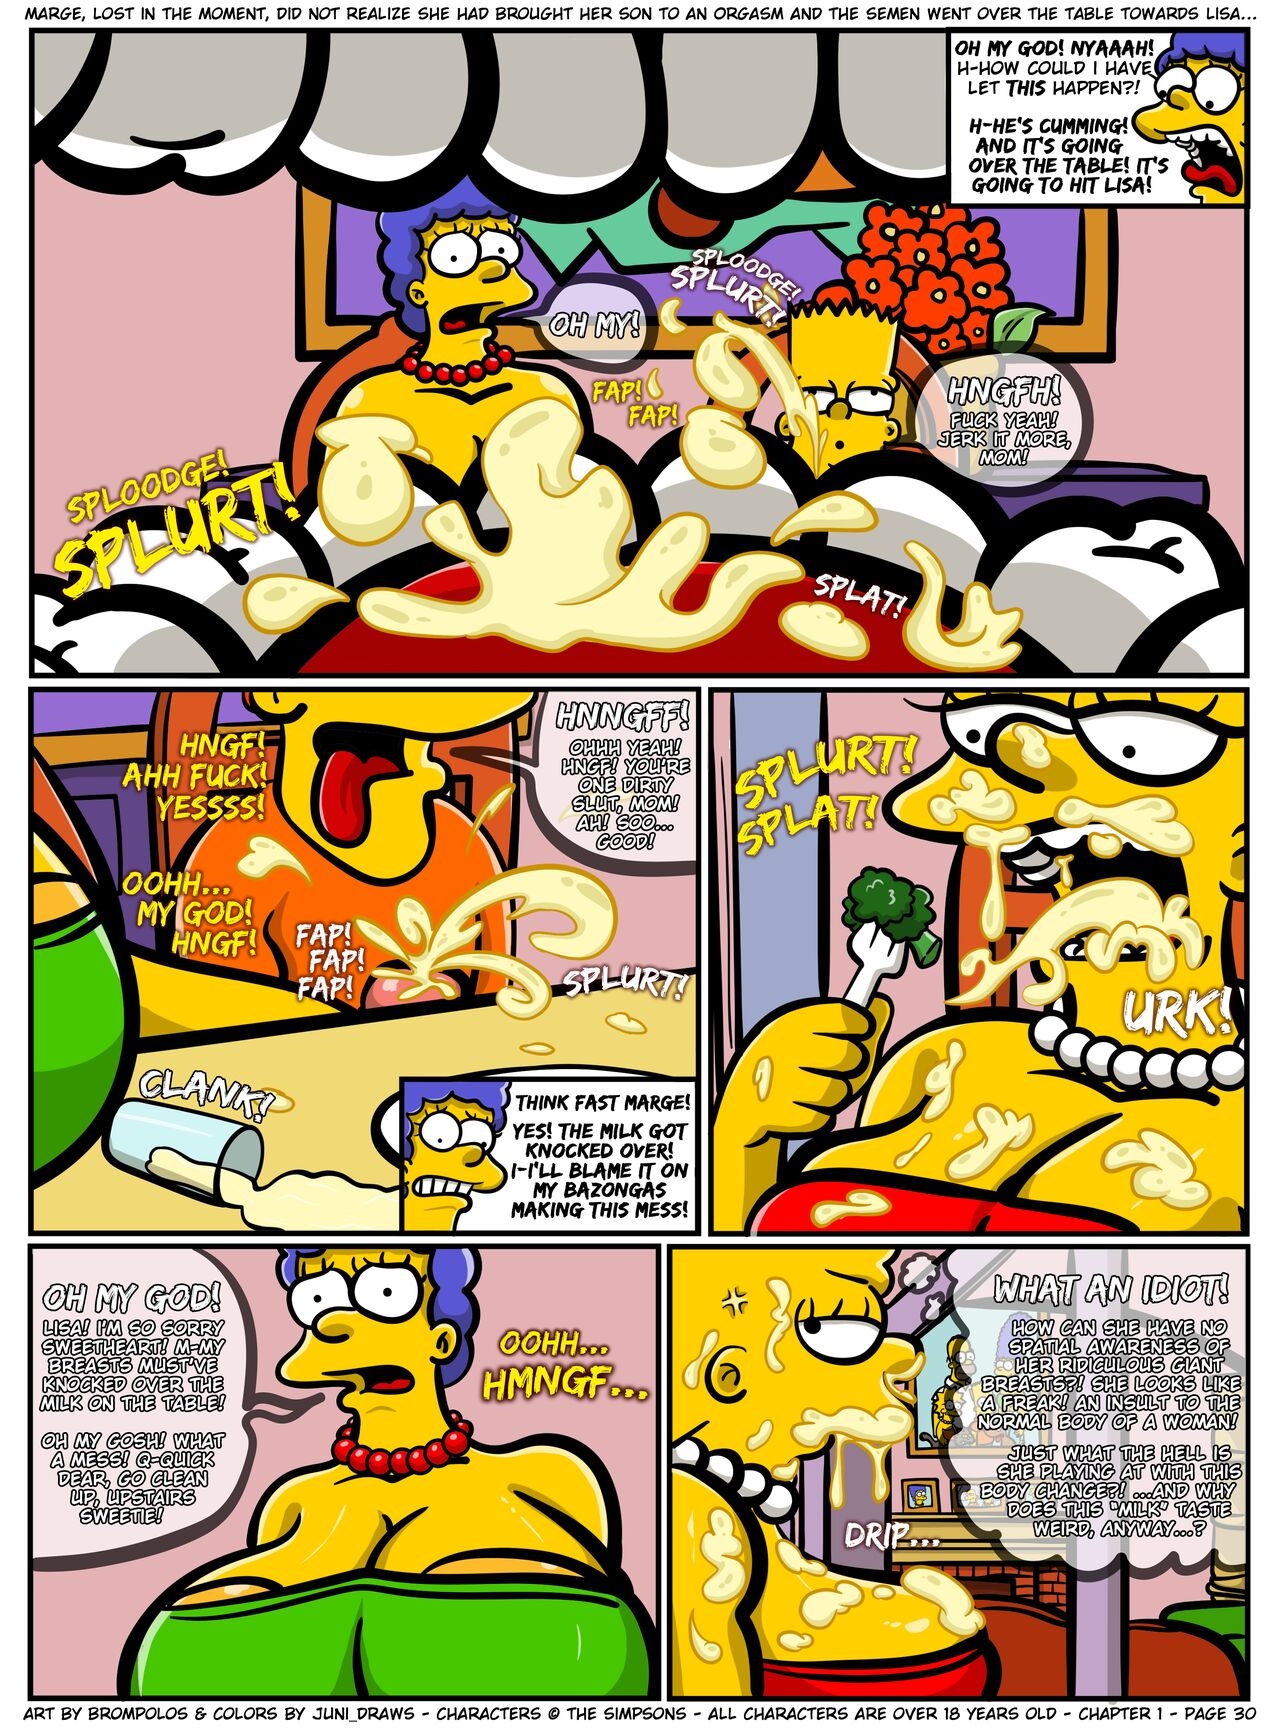 [Brompolos/Juni_Draws] The Sexensteins (Simpsons) [Ongoing] 30